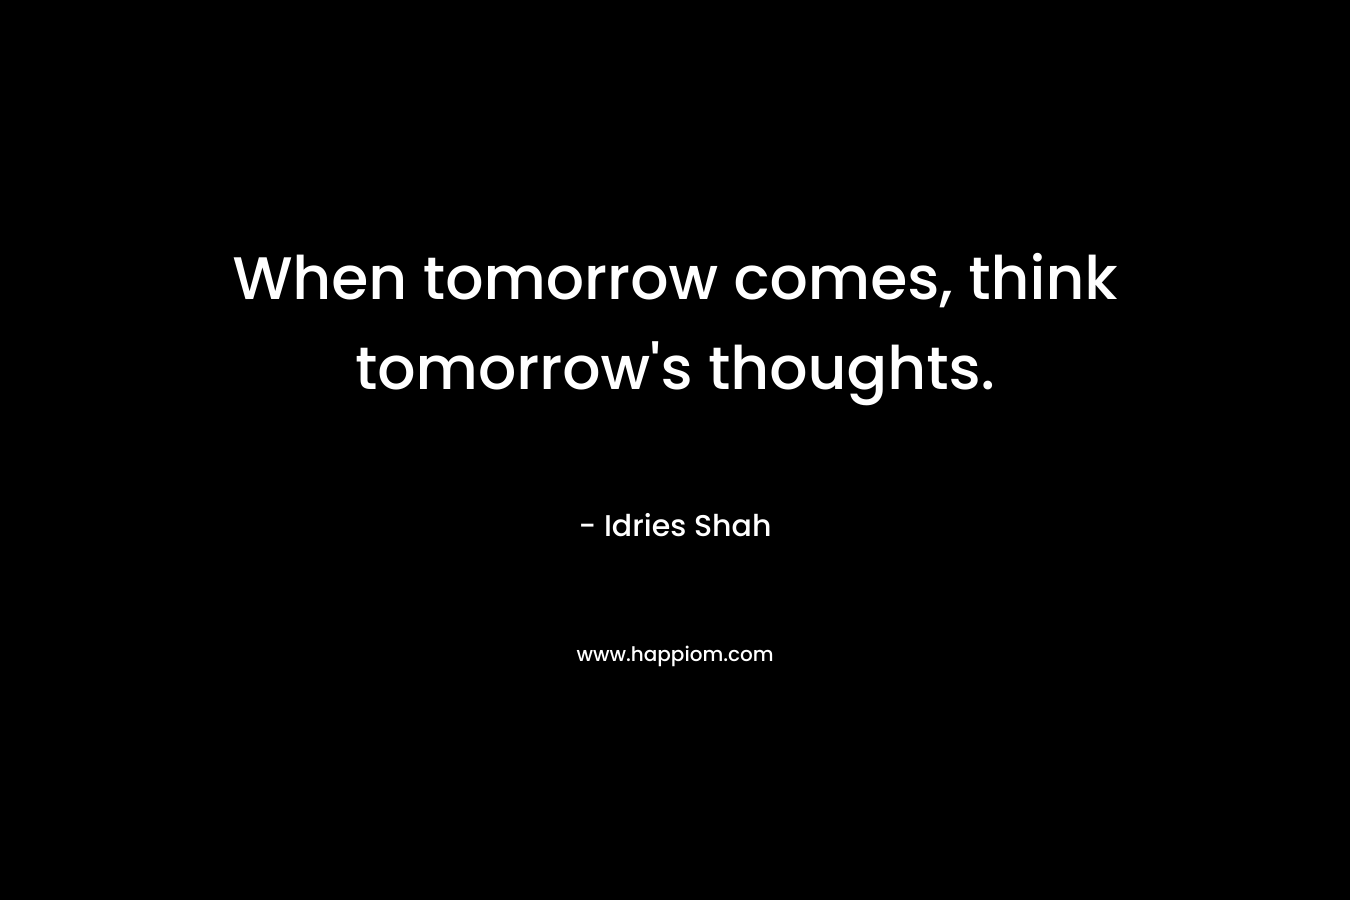 When tomorrow comes, think tomorrow’s thoughts. – Idries Shah